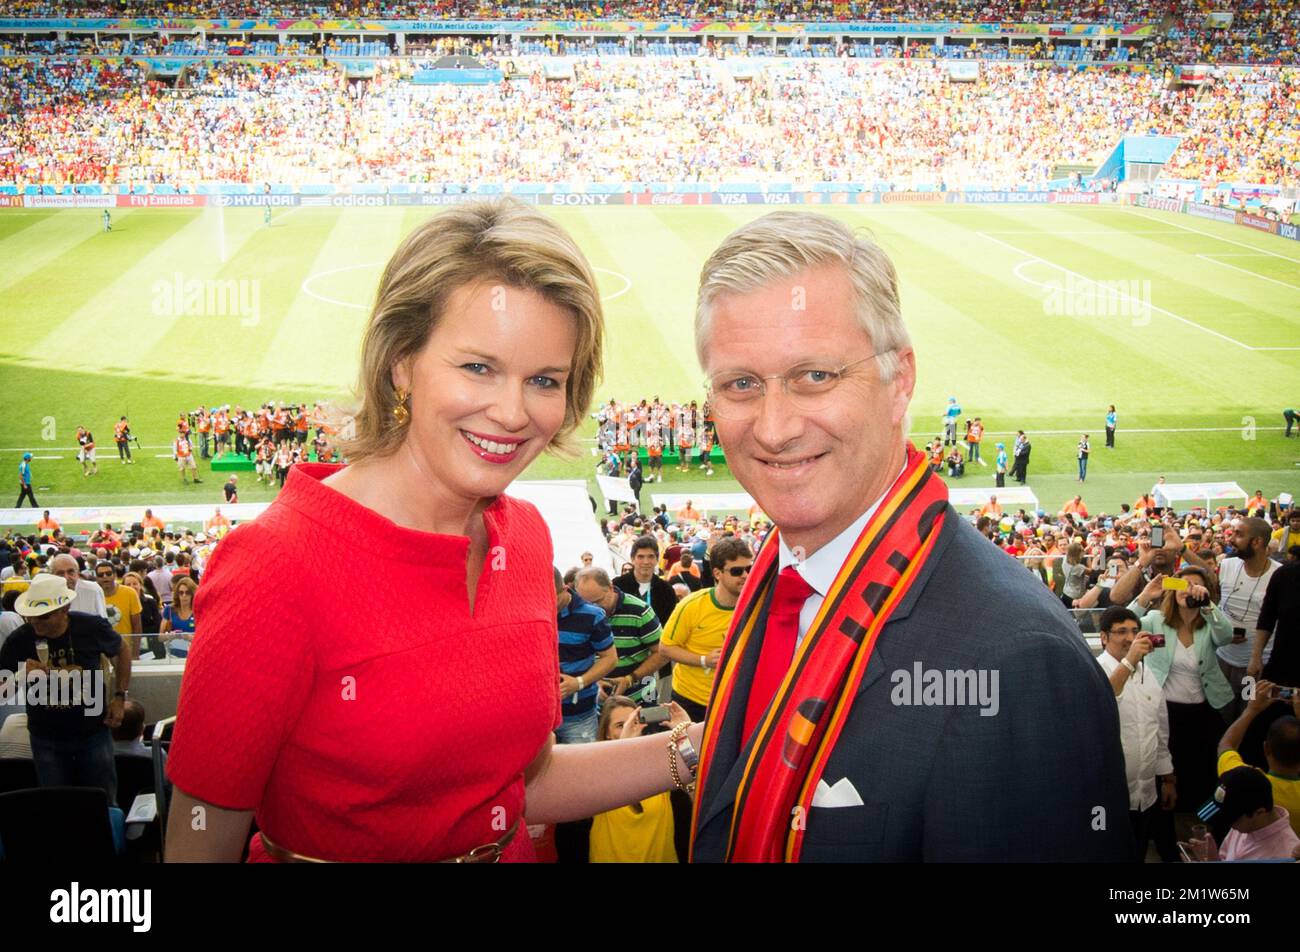 20140622 - RIO DE JANEIRO, BRAZIL: Queen Mathilde of Belgium and King Philippe - Filip of Belgium seen in the stand at the start of a soccer game between Belgian national team The Red Devils and Russia in Rio de Janeiro, Brazil, the second game in Group H of the first round of the 2014 FIFA World Cup, Sunday 22 June 2014.   BELGA PHOTO BENOIT DOPPAGNE Stock Photo